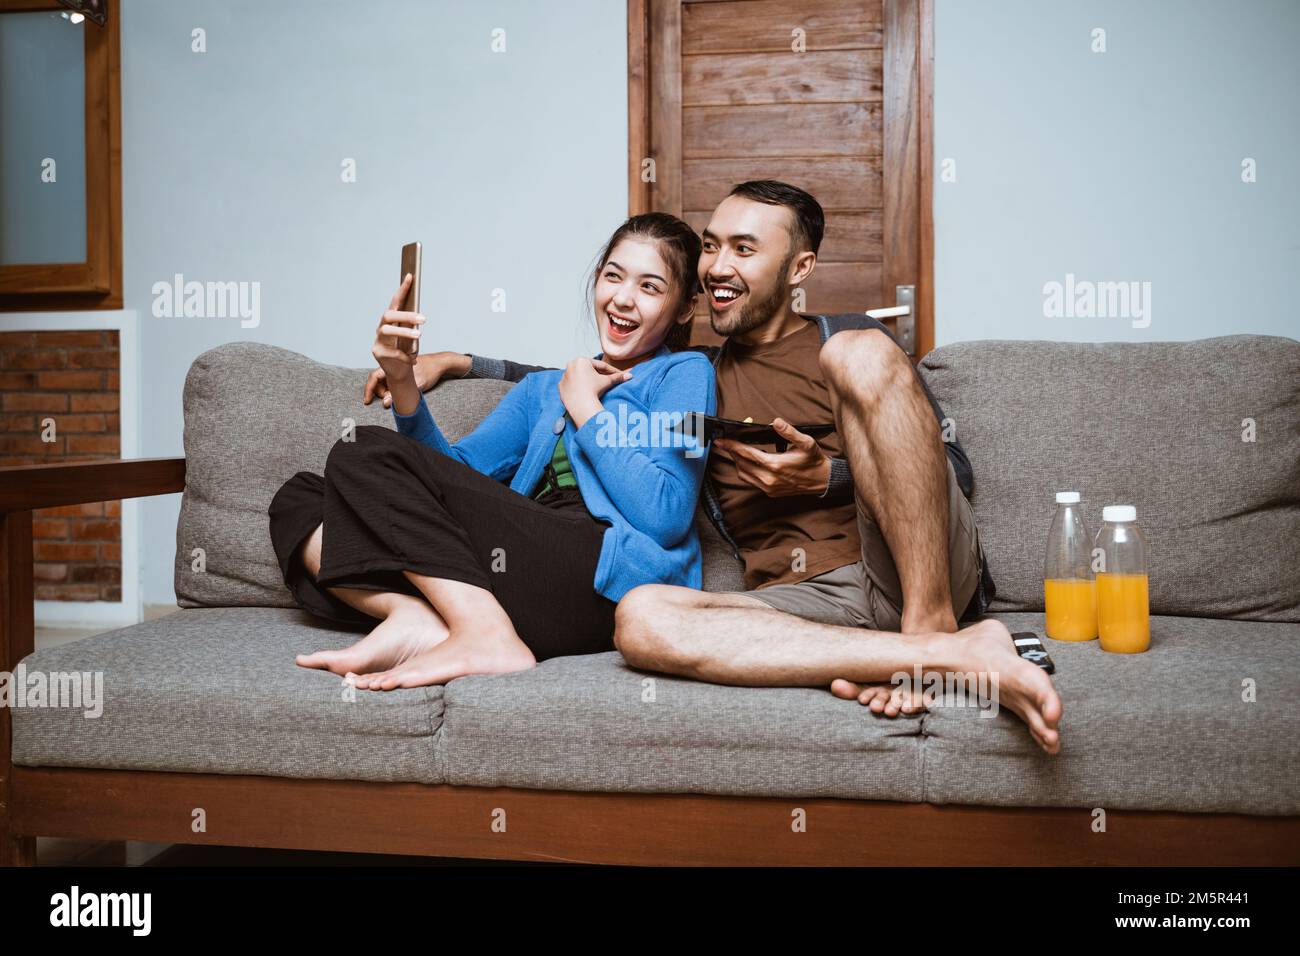 young asian woman and man making video call using smartphone Stock Photo